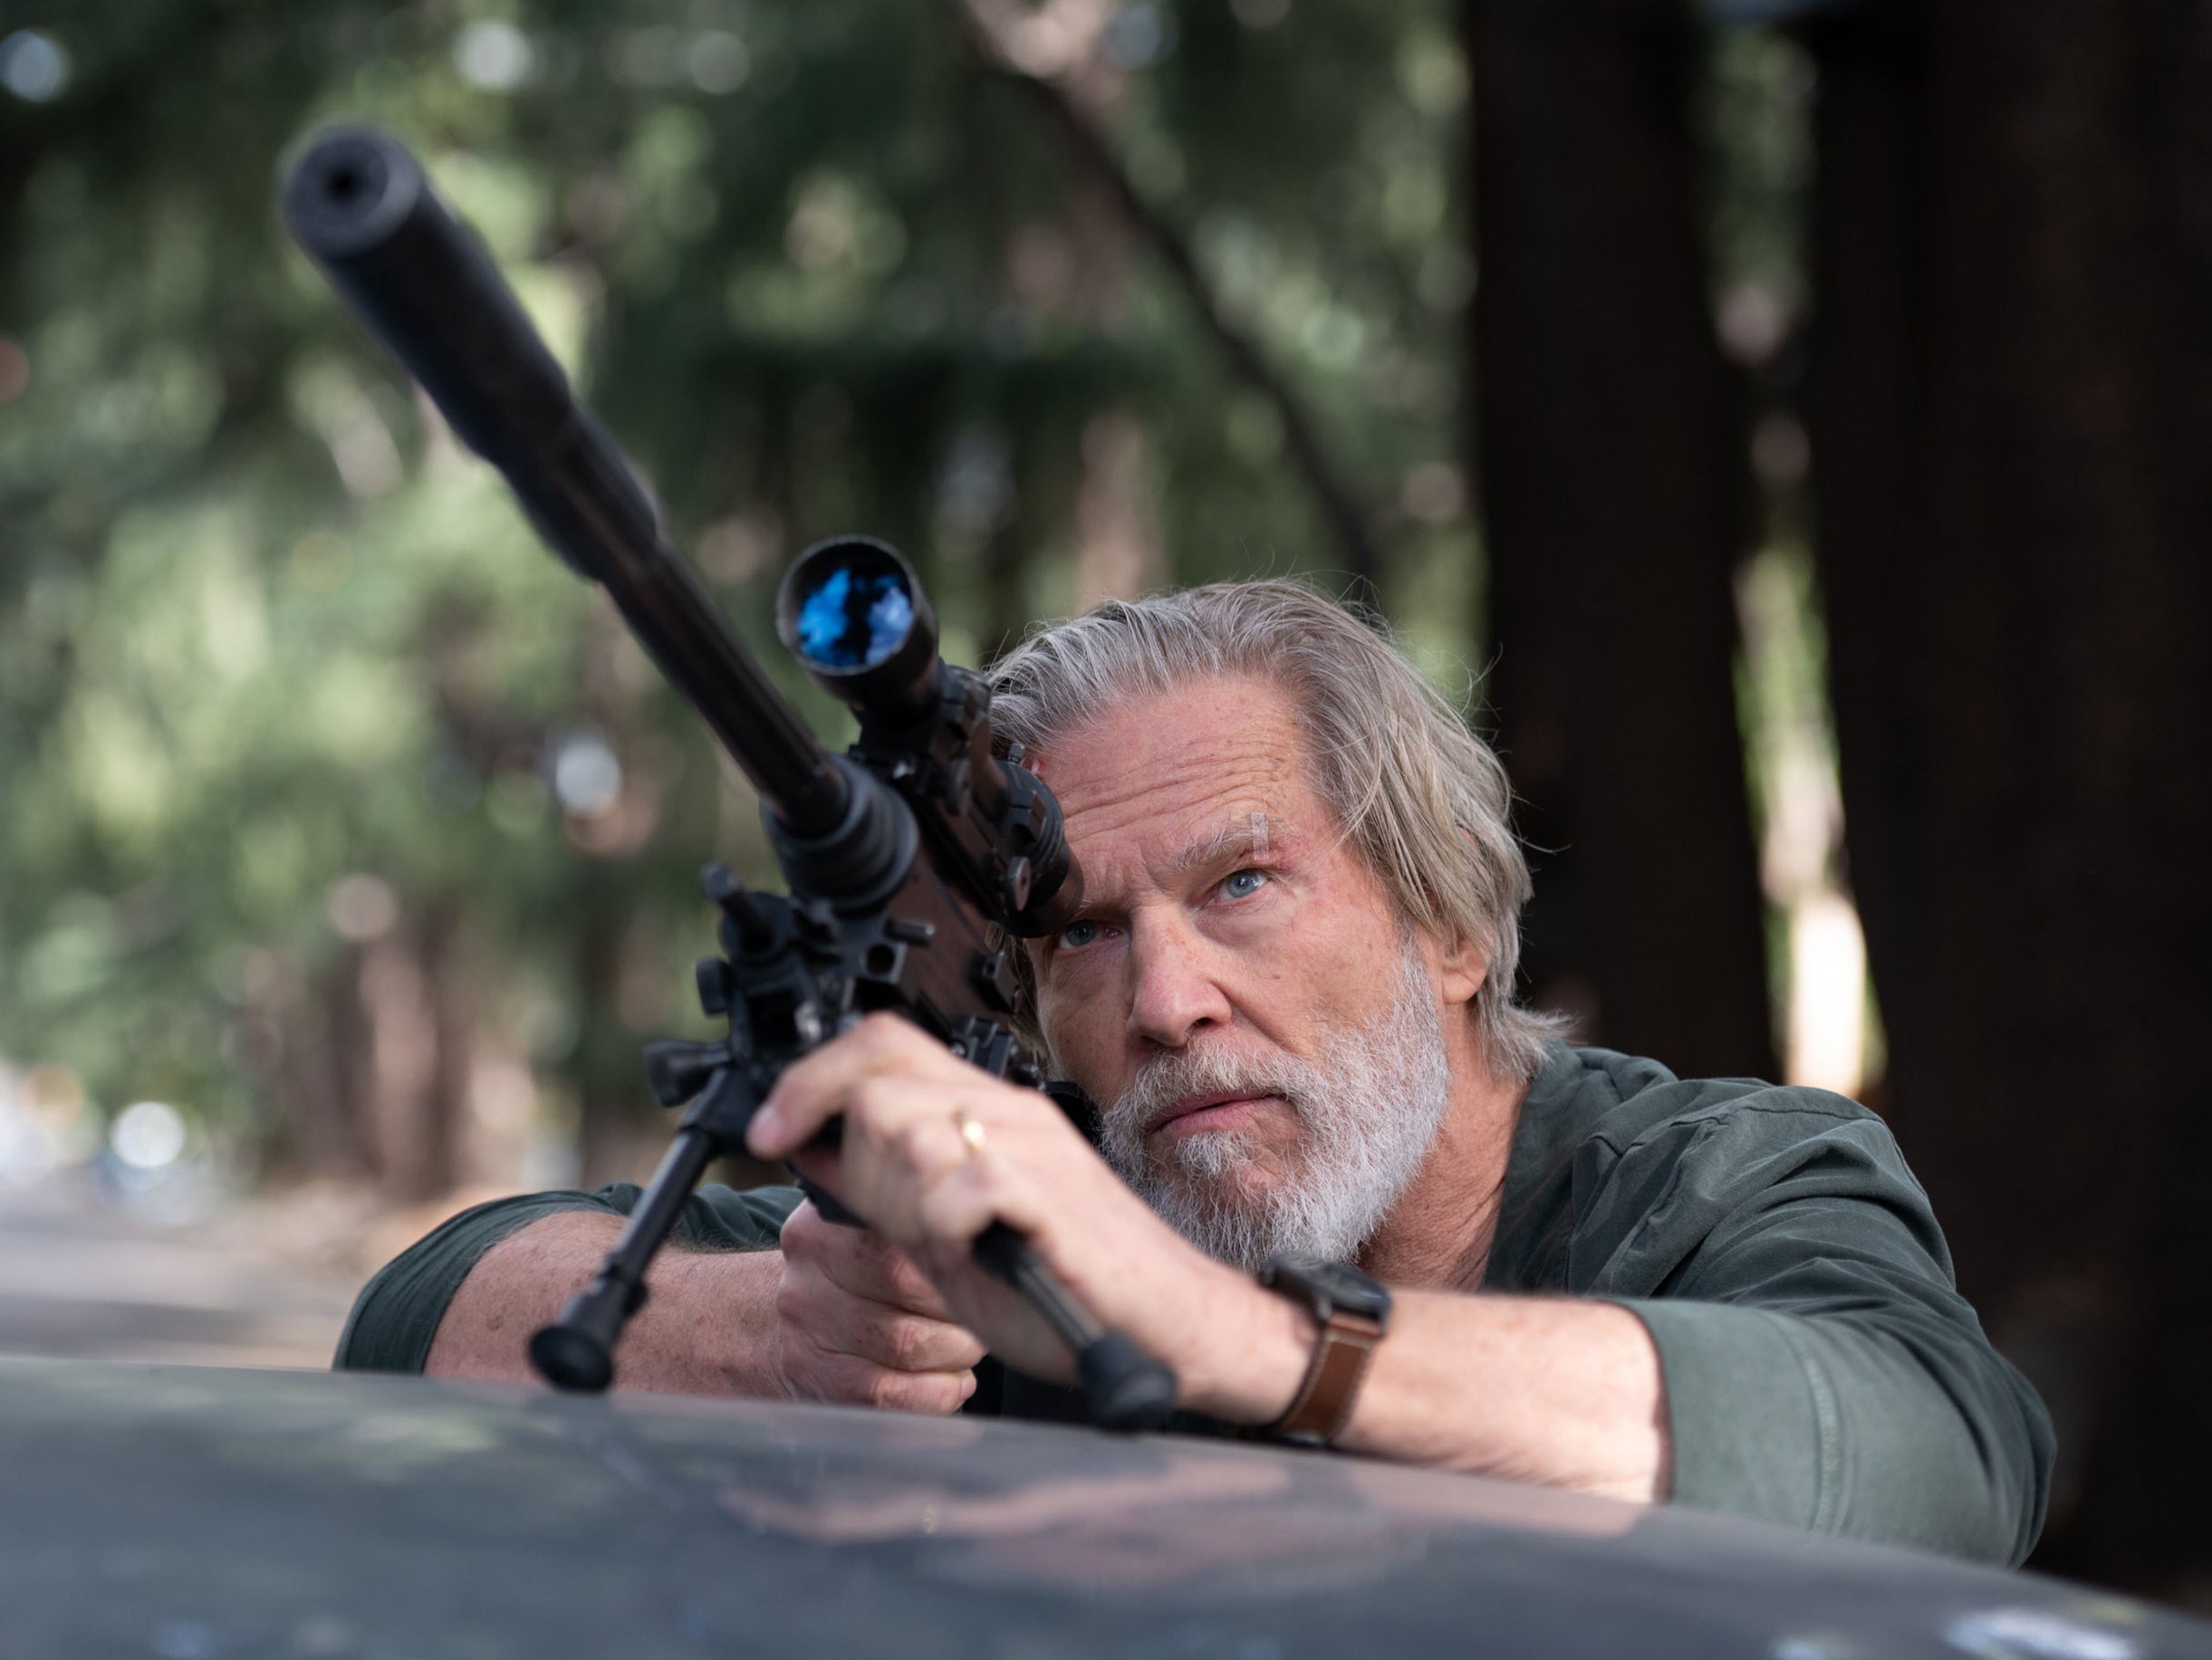 No country for old man: Jeff Bridges in ‘The Old Man’, out now on Disney+